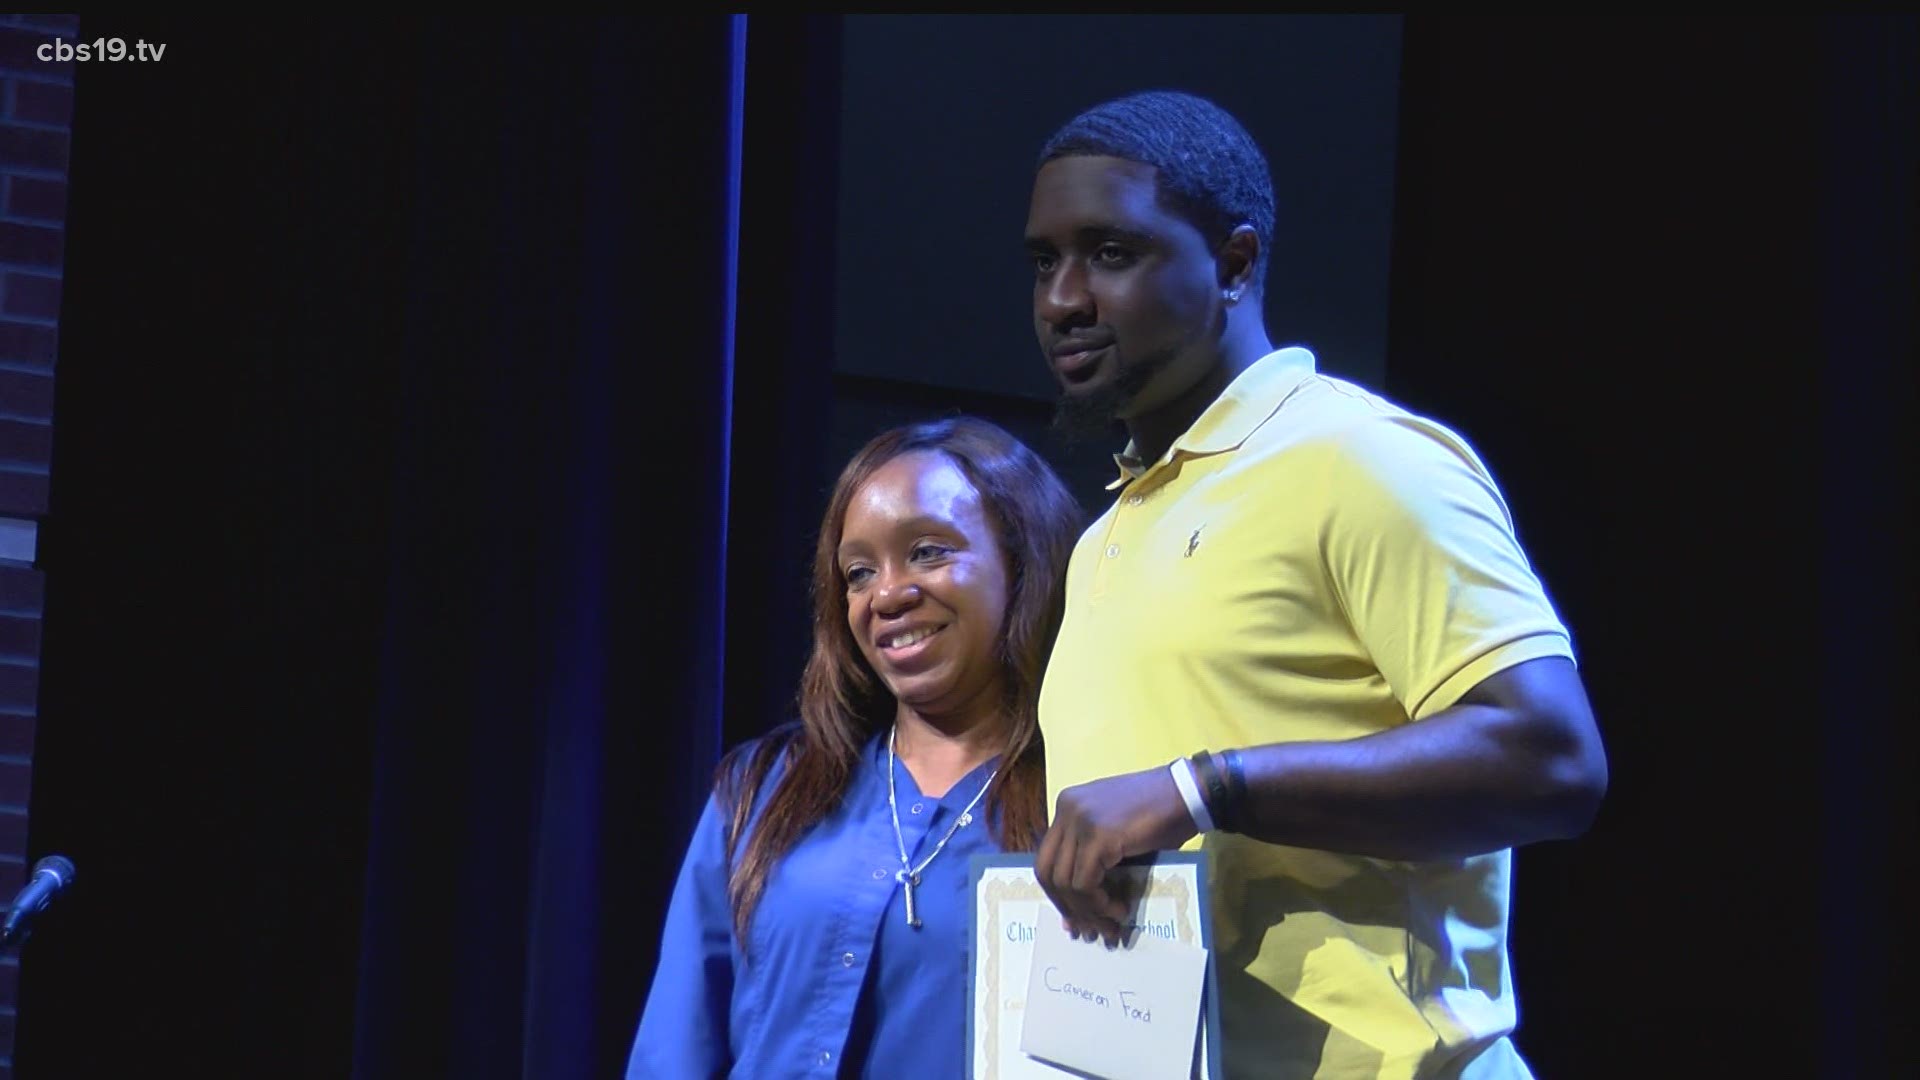 Johnny "Coach" Williams gave four decades of his live to helping students at Chapel Hill High School and this morning a scholarship was awarded in his name.